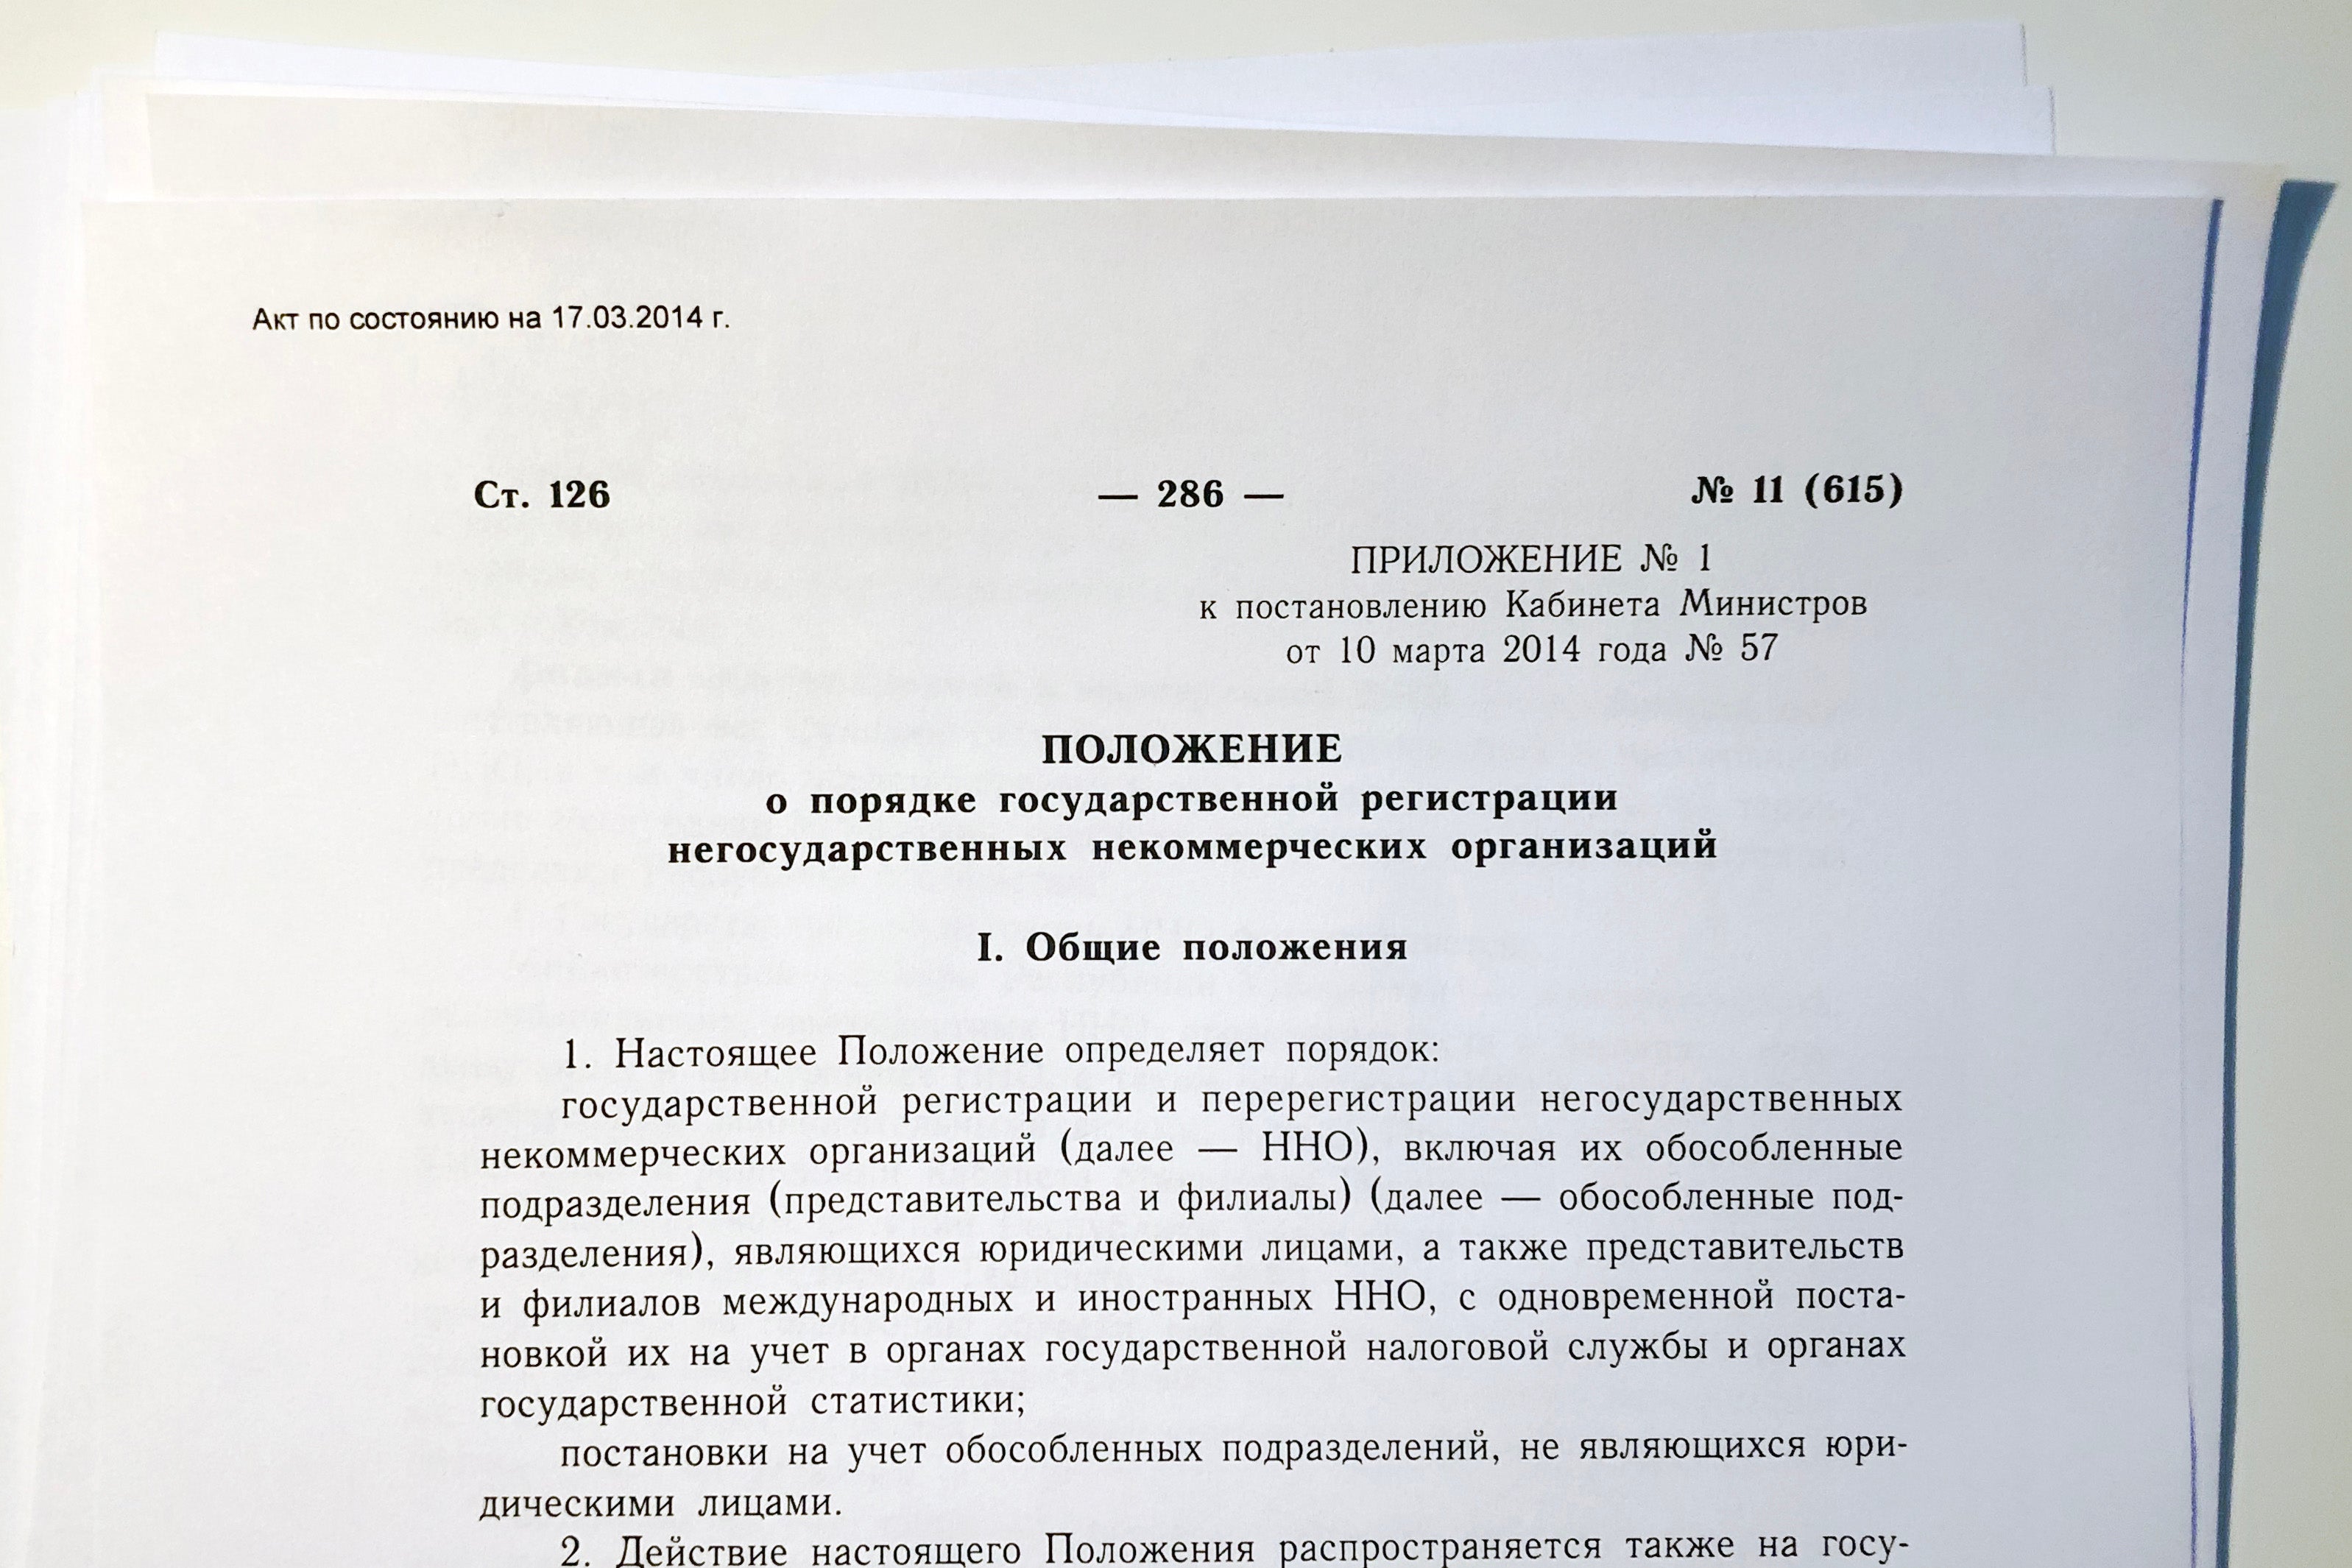 The 2014 Cabinet of Ministers Decree on the procedure for state registration of nongovernmental non-profit organizations.